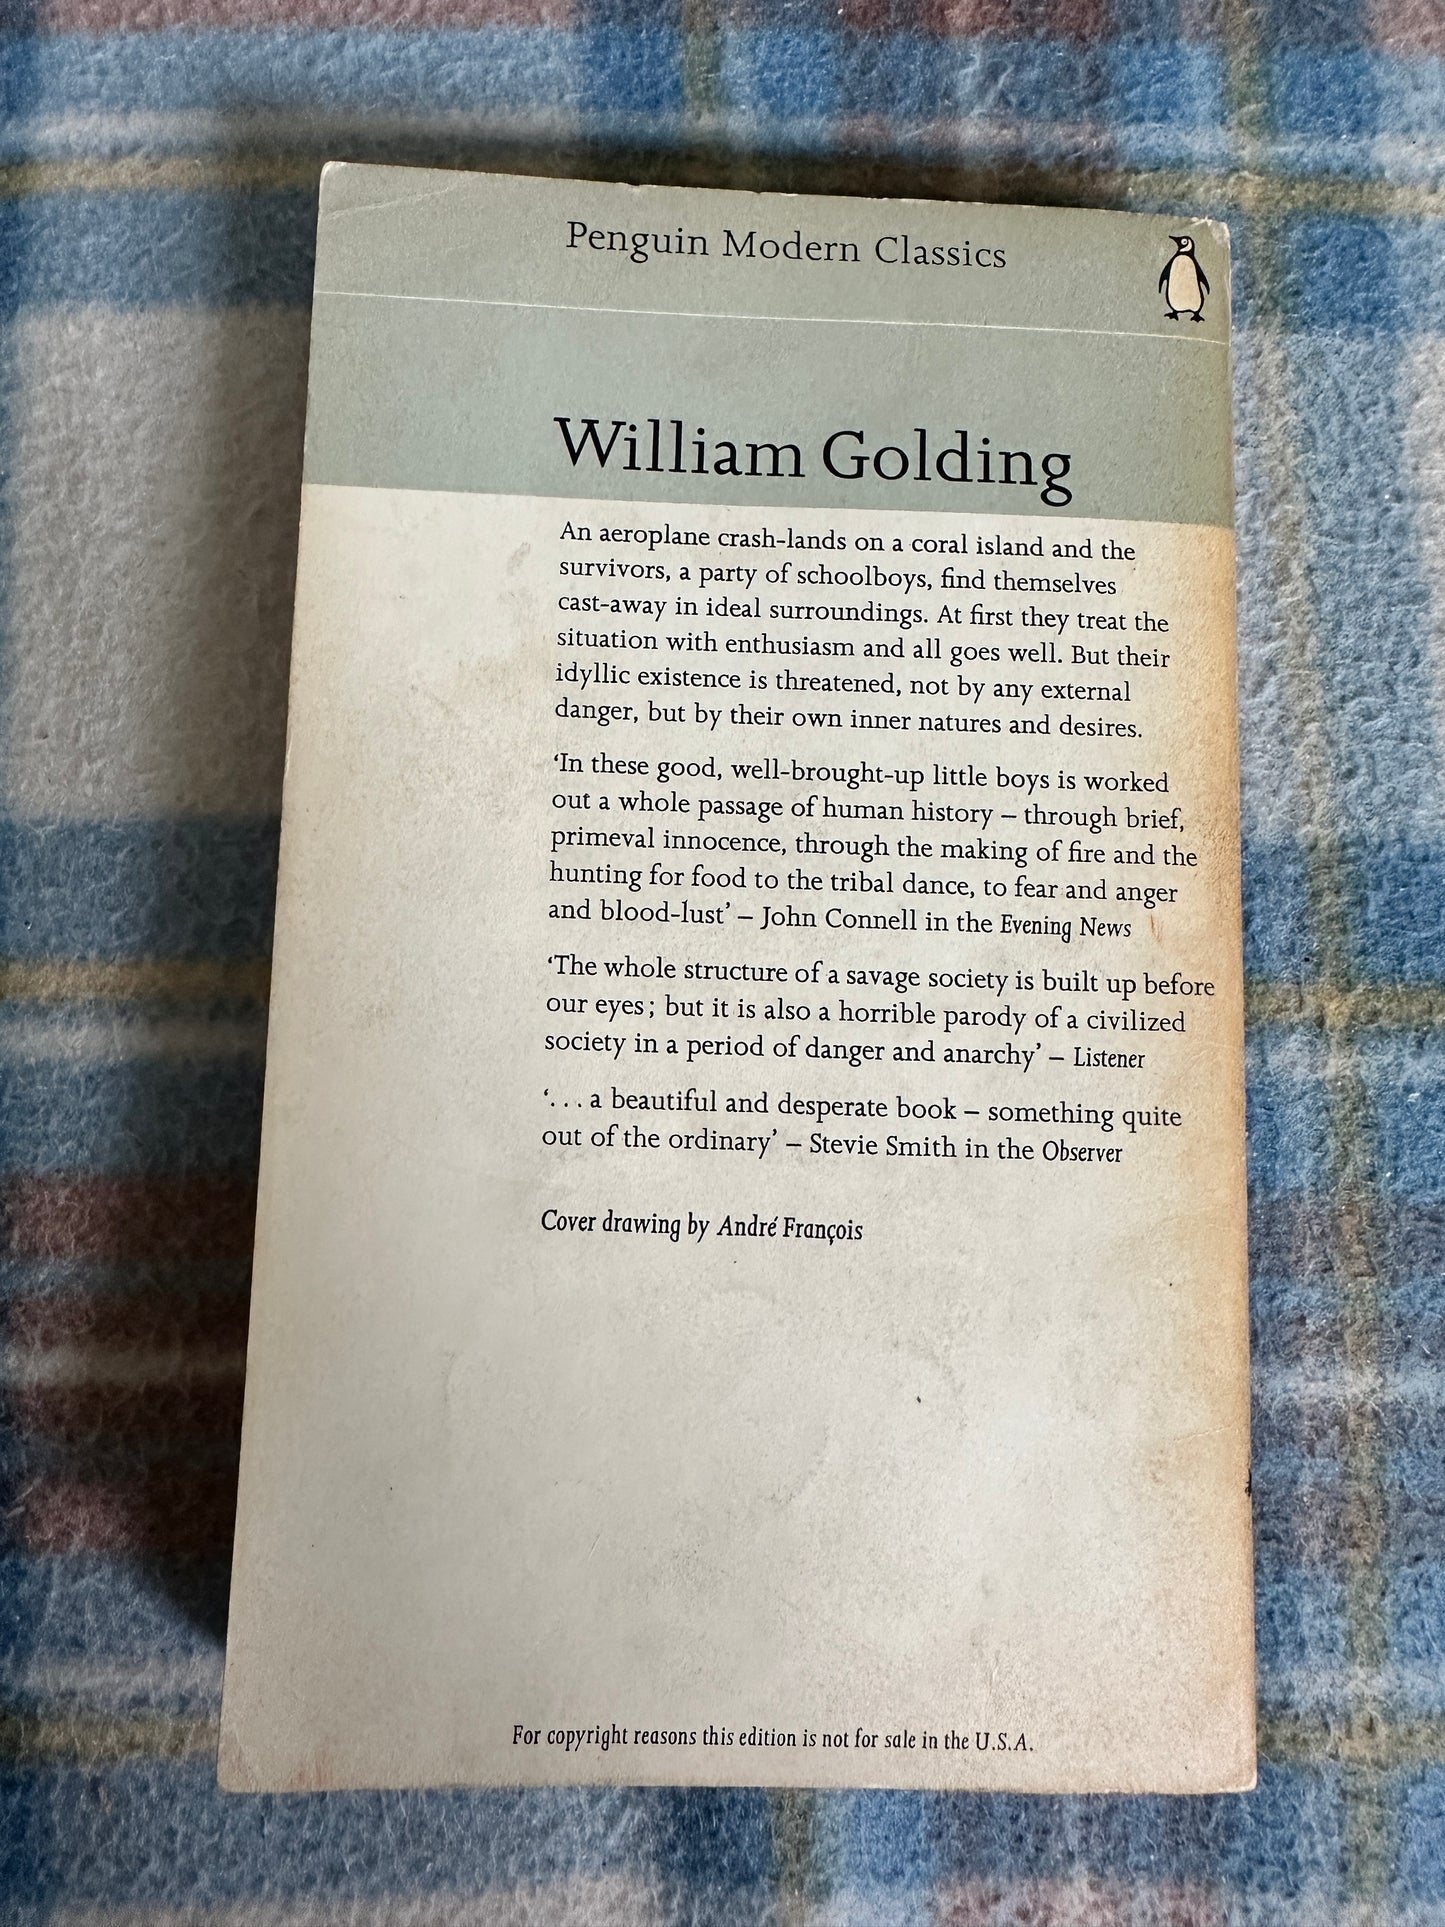 1965 Lord Of The Flies - William Golding(Penguin)